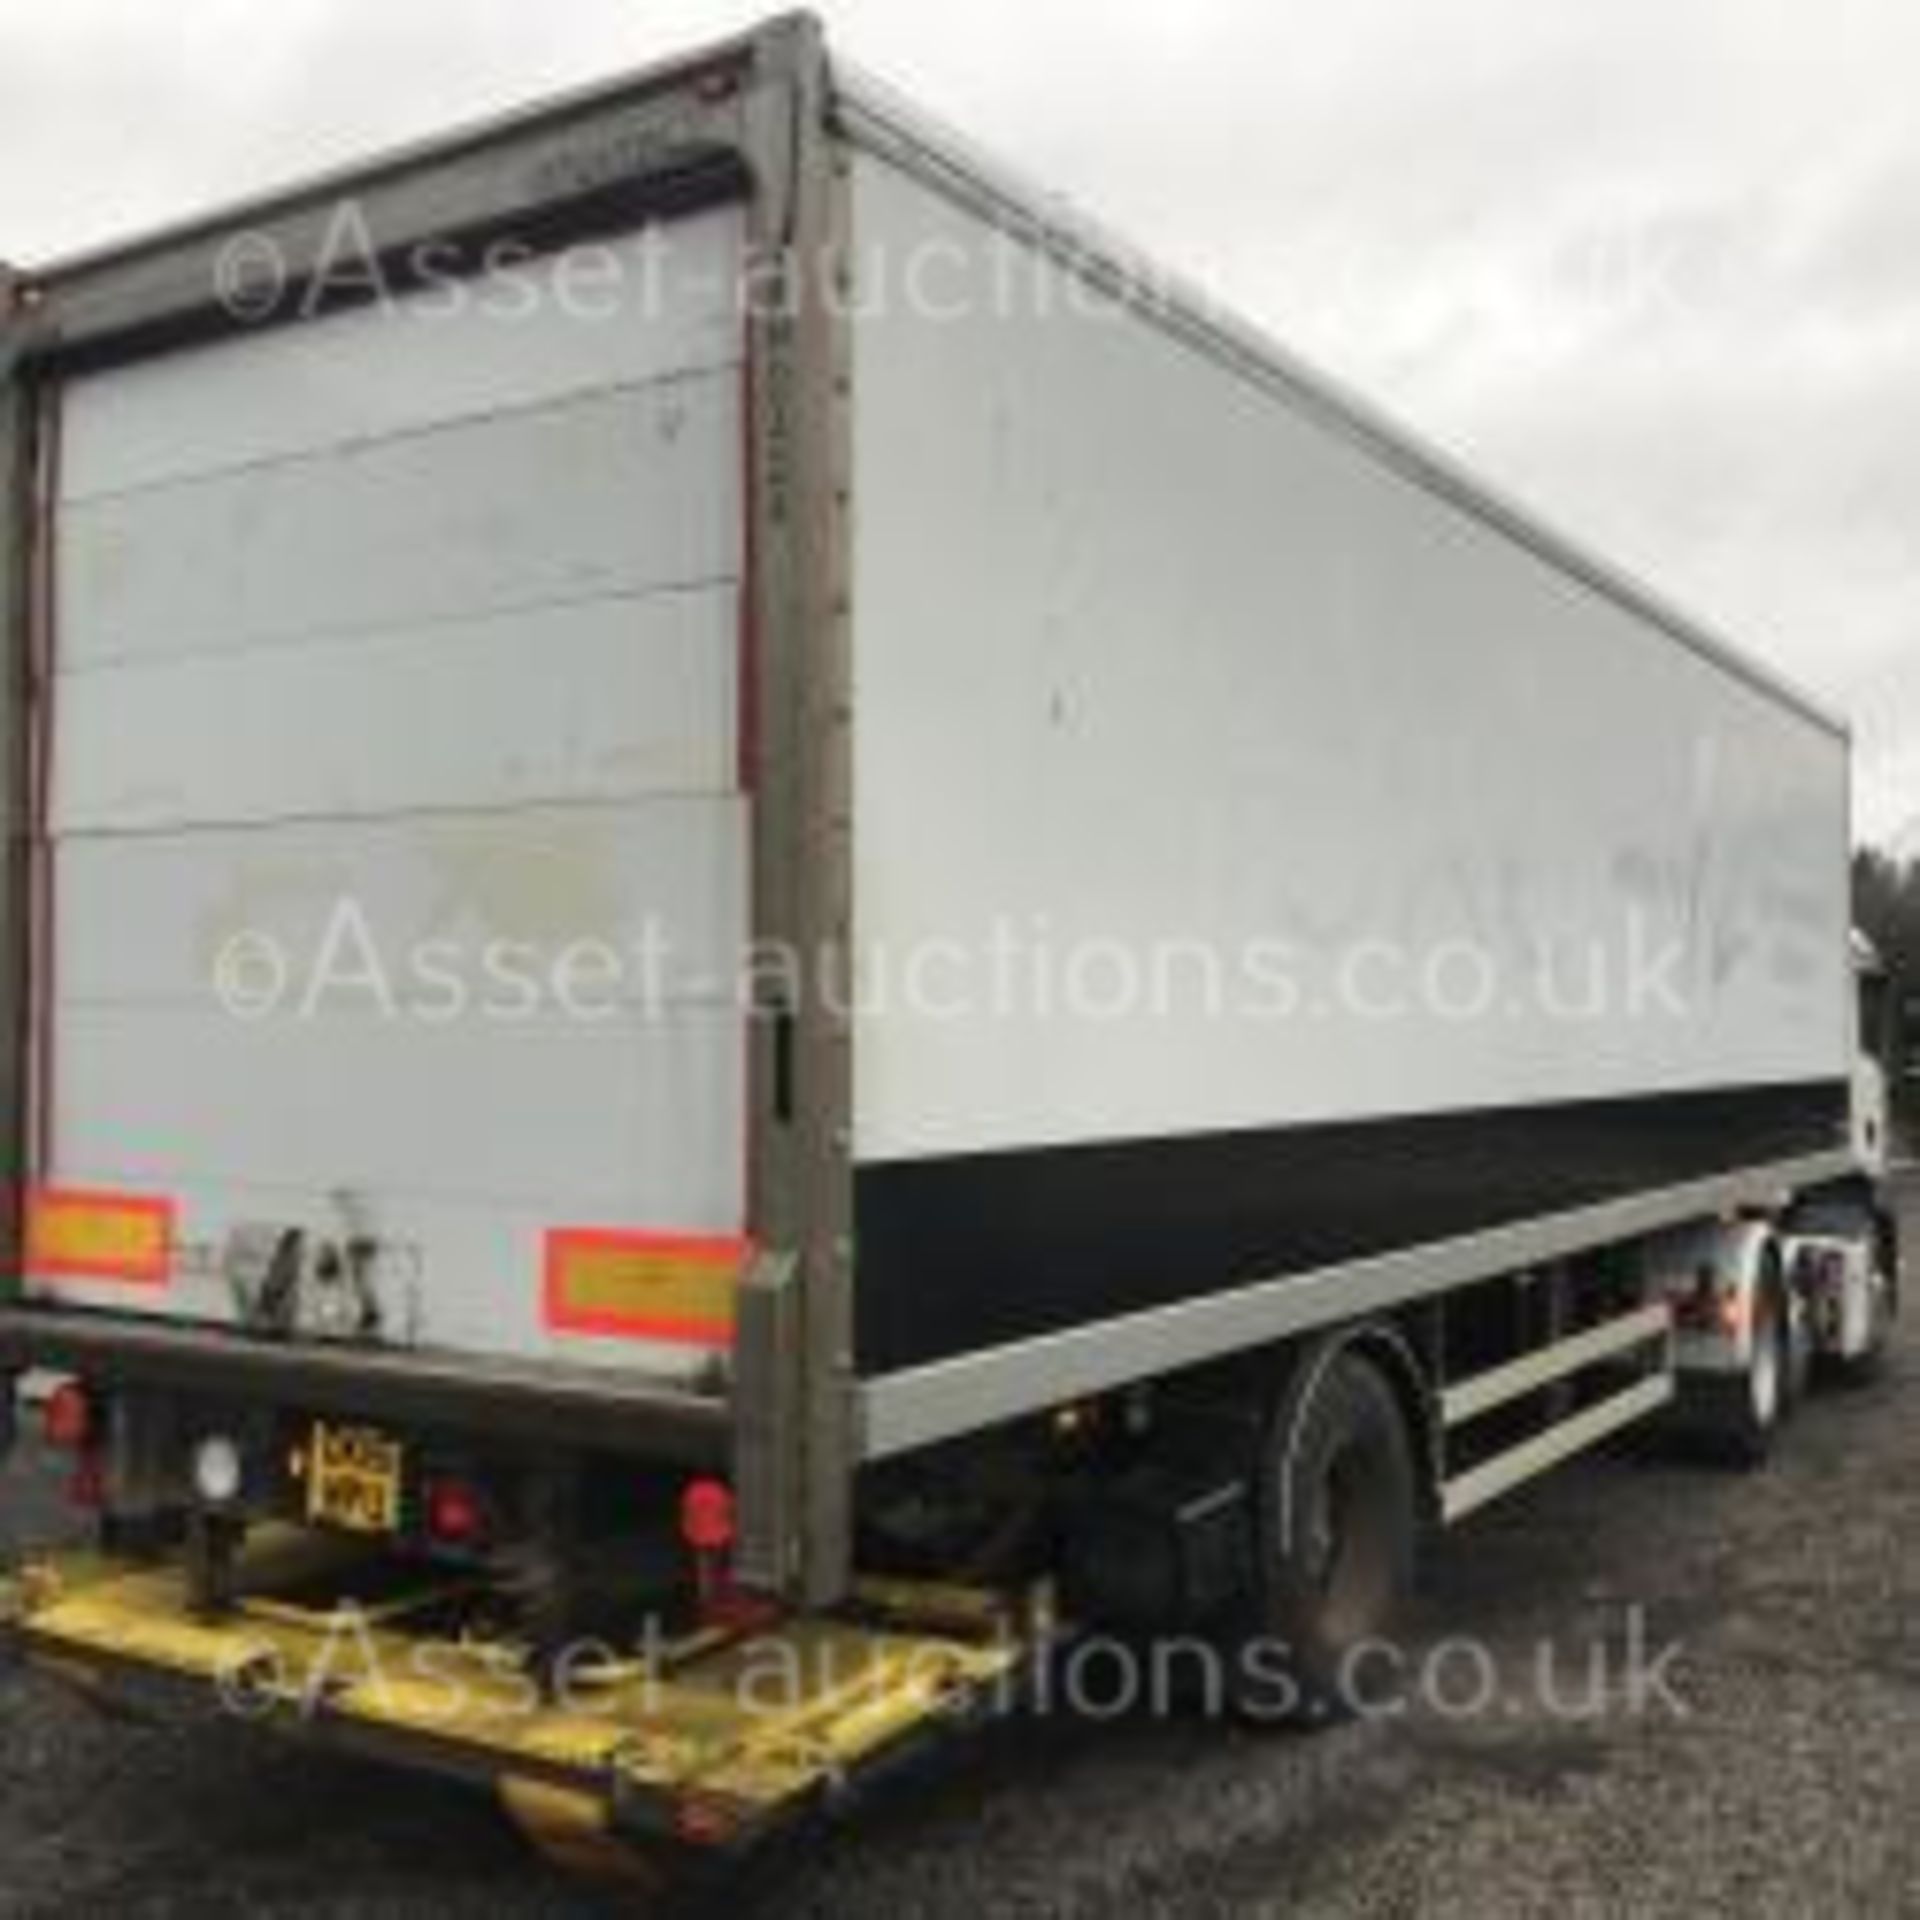 2007 DONBUR SINGLE AXLE TRAILER WITH TAIL LIFT, GOOD CONDITION *PLUS VAT* - Image 7 of 22